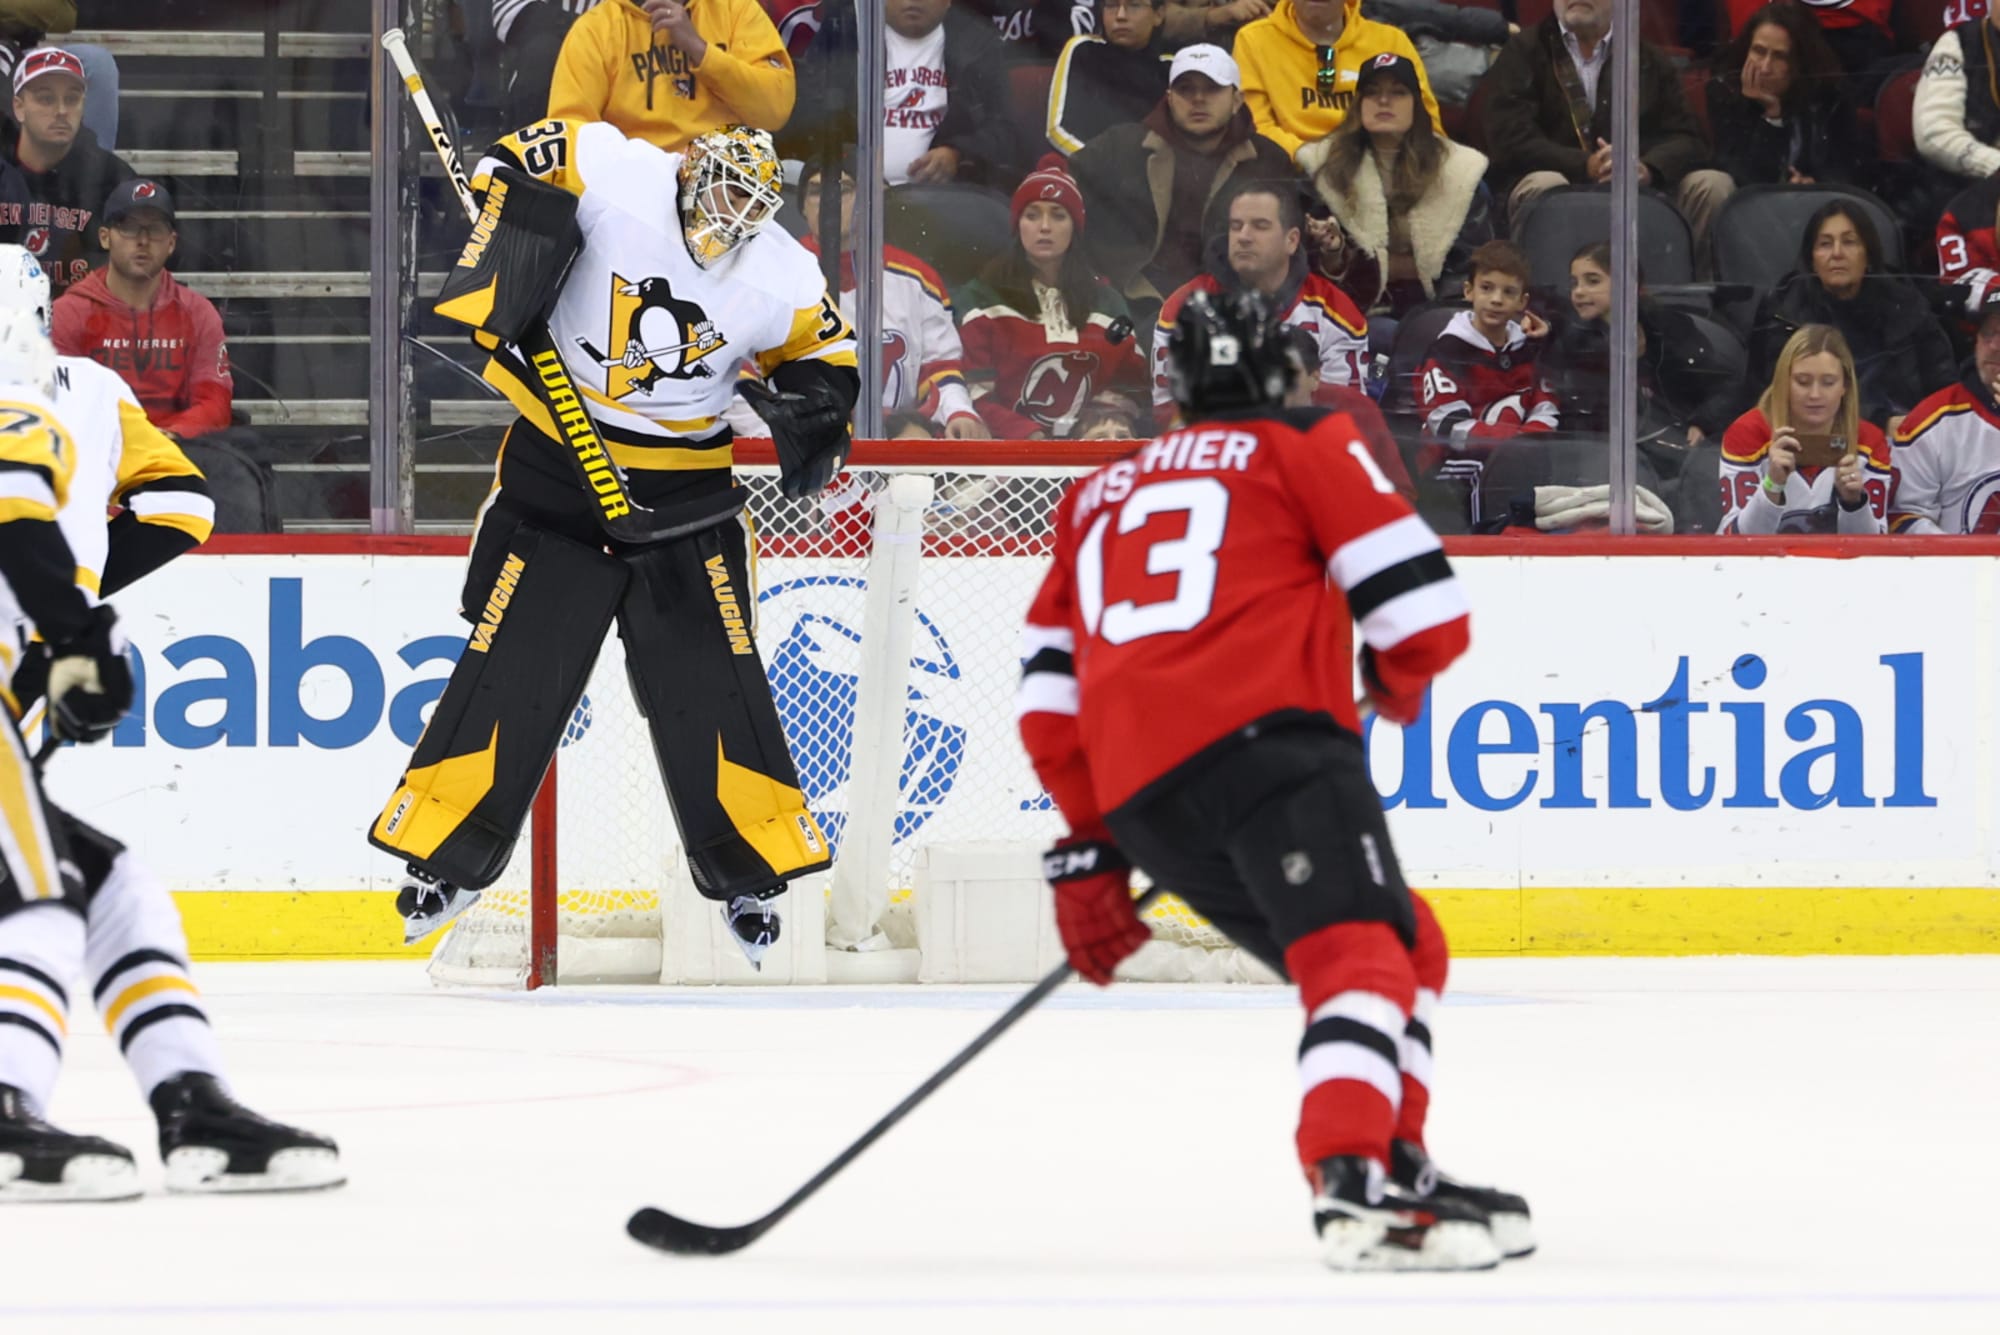 NJ Devils free agents: Who stays, who goes?